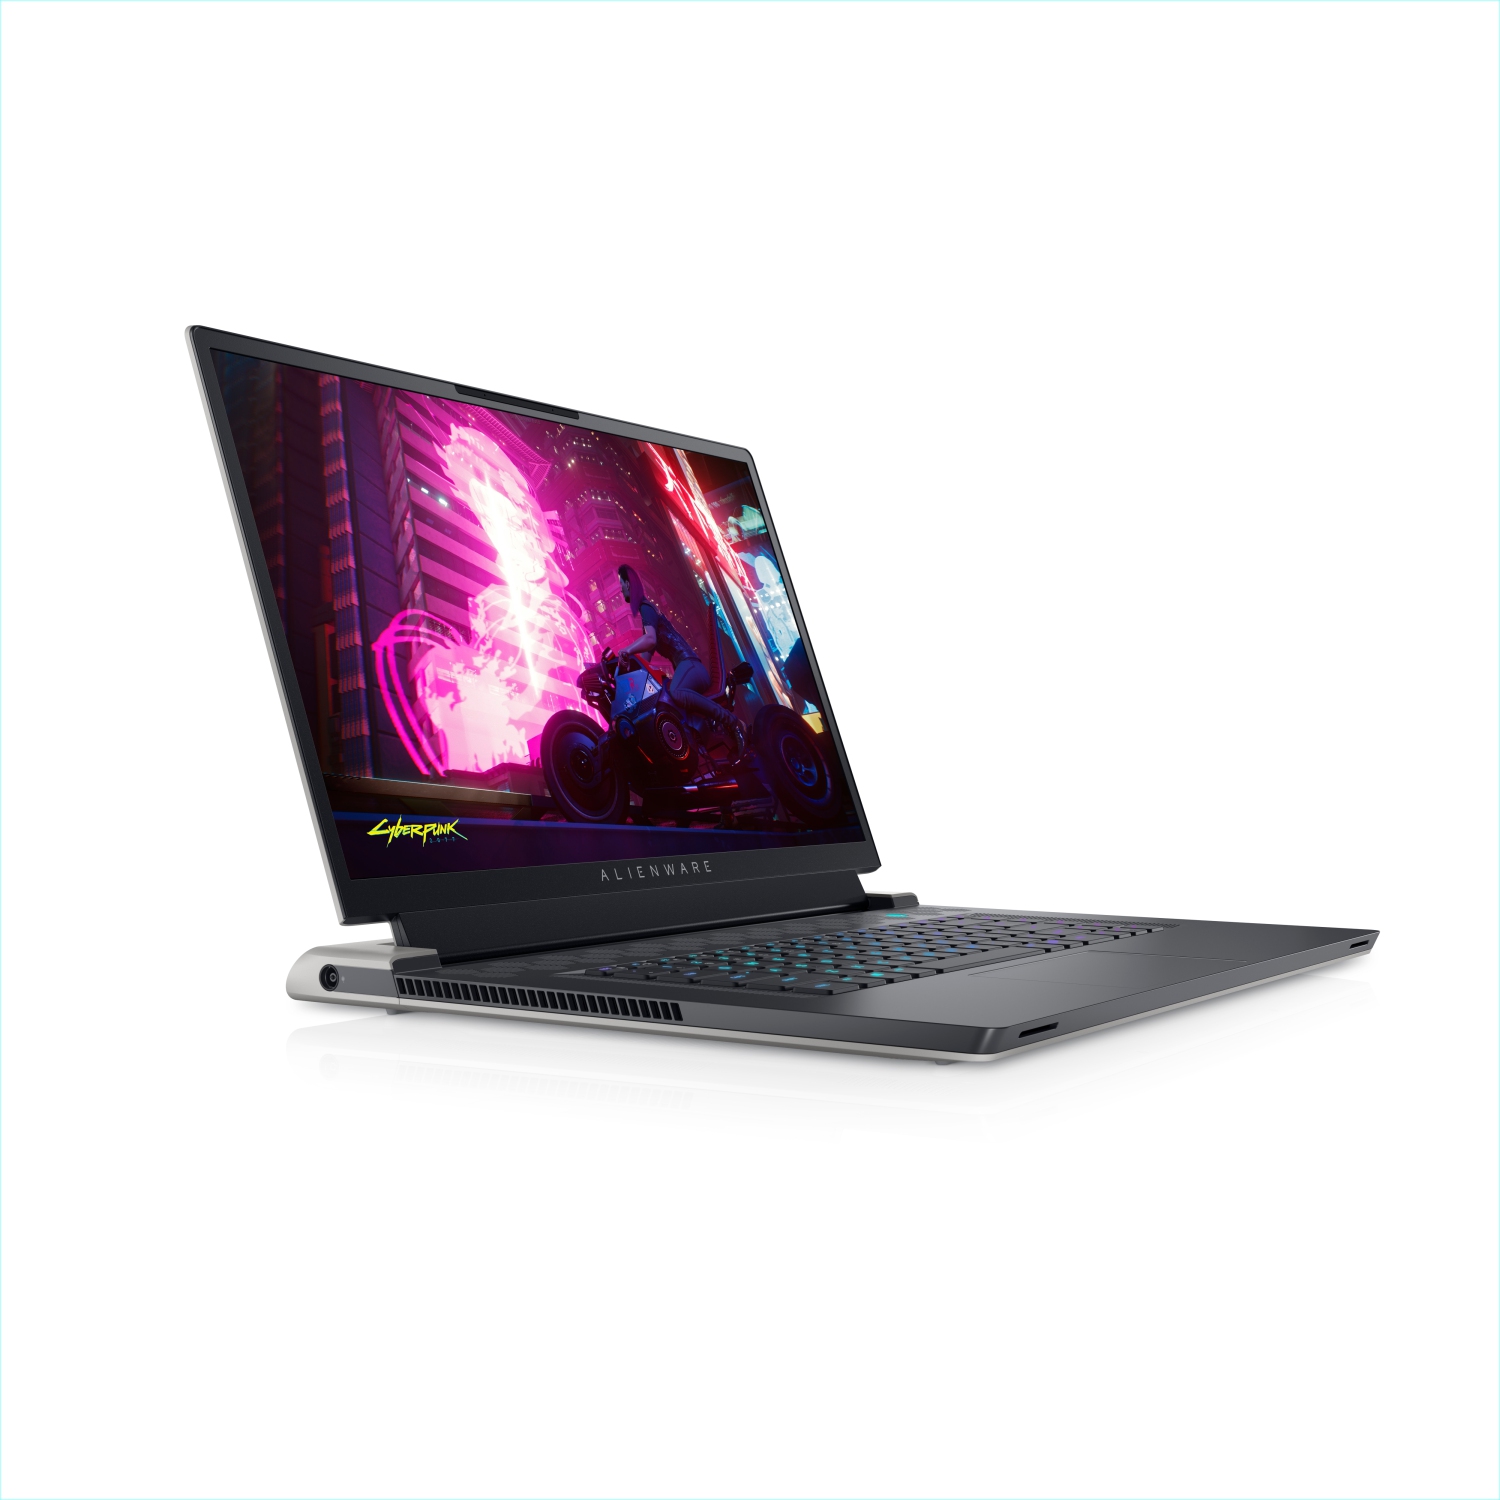 Refurbished (Excellent) – Dell Alienware X17 R1 Gaming Laptop (2021) | 17.3" FHD | Core i7 - 2TB SSD - 32GB RAM - RTX 3070 | 8 Cores @ 4.6 GHz - 11th Gen CPU - 8GB GDDR6